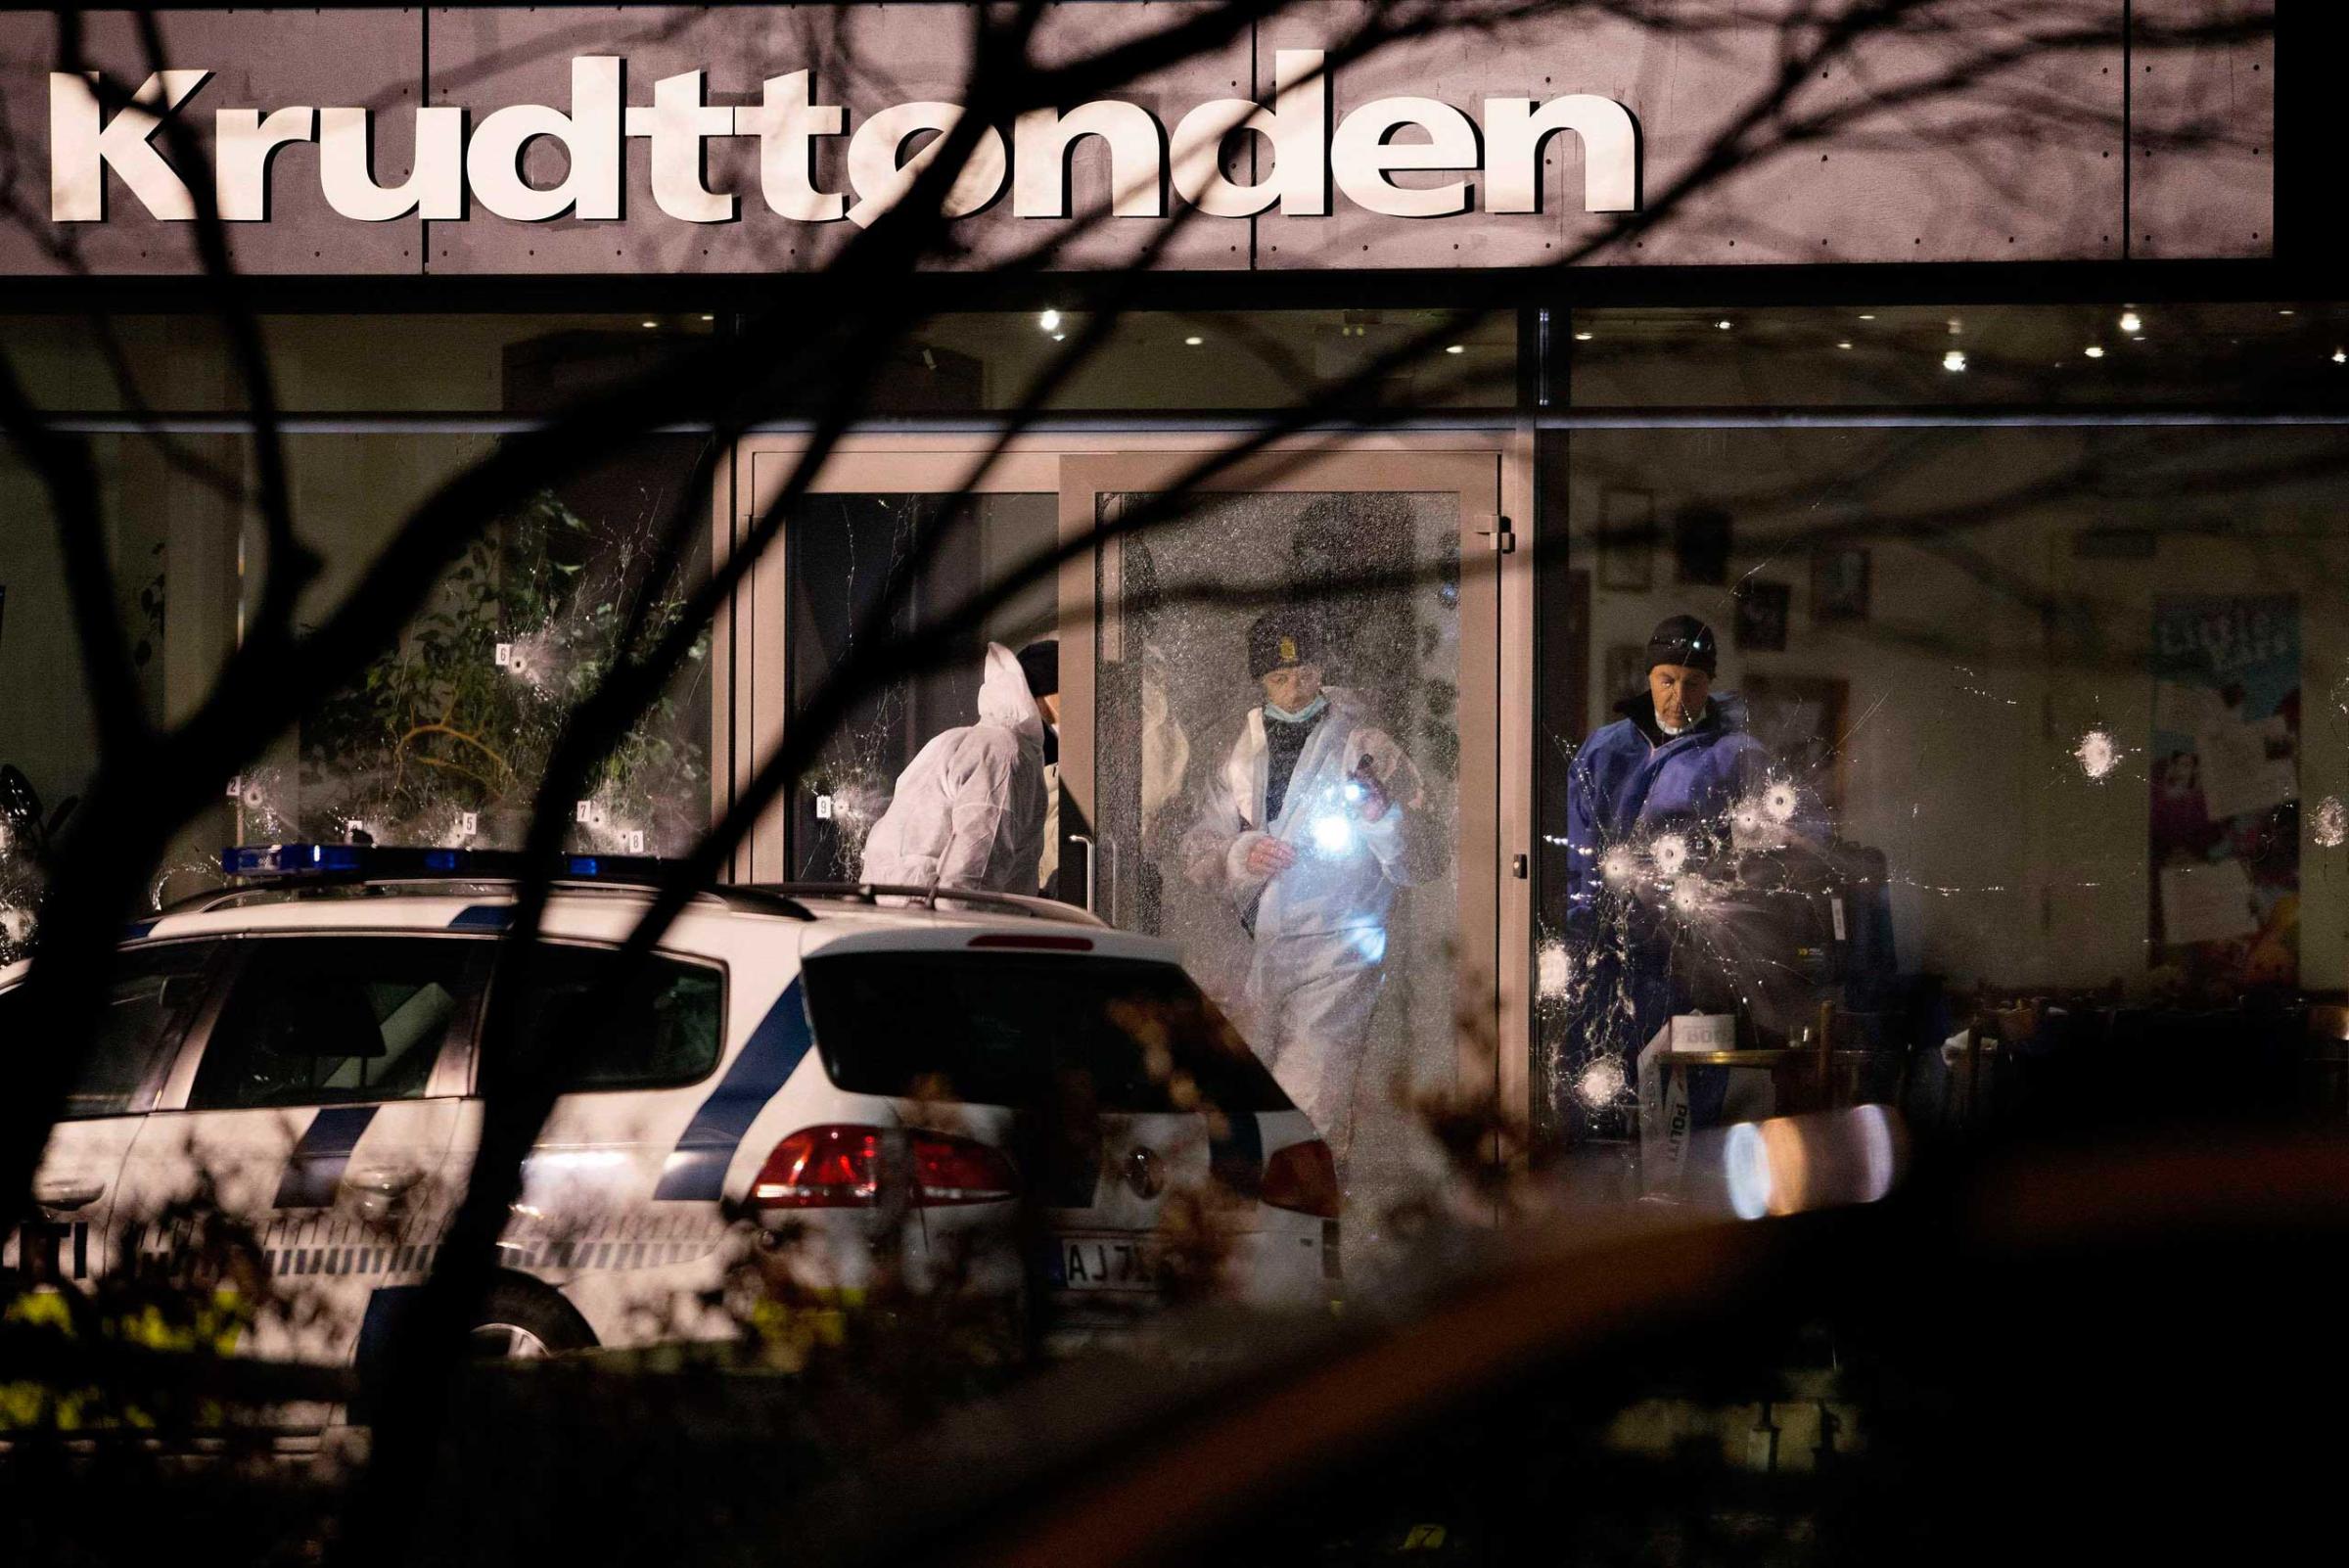 Forensic investigators are seen at the site of a shooting in Copenhagen, Feb. 14, 2015.